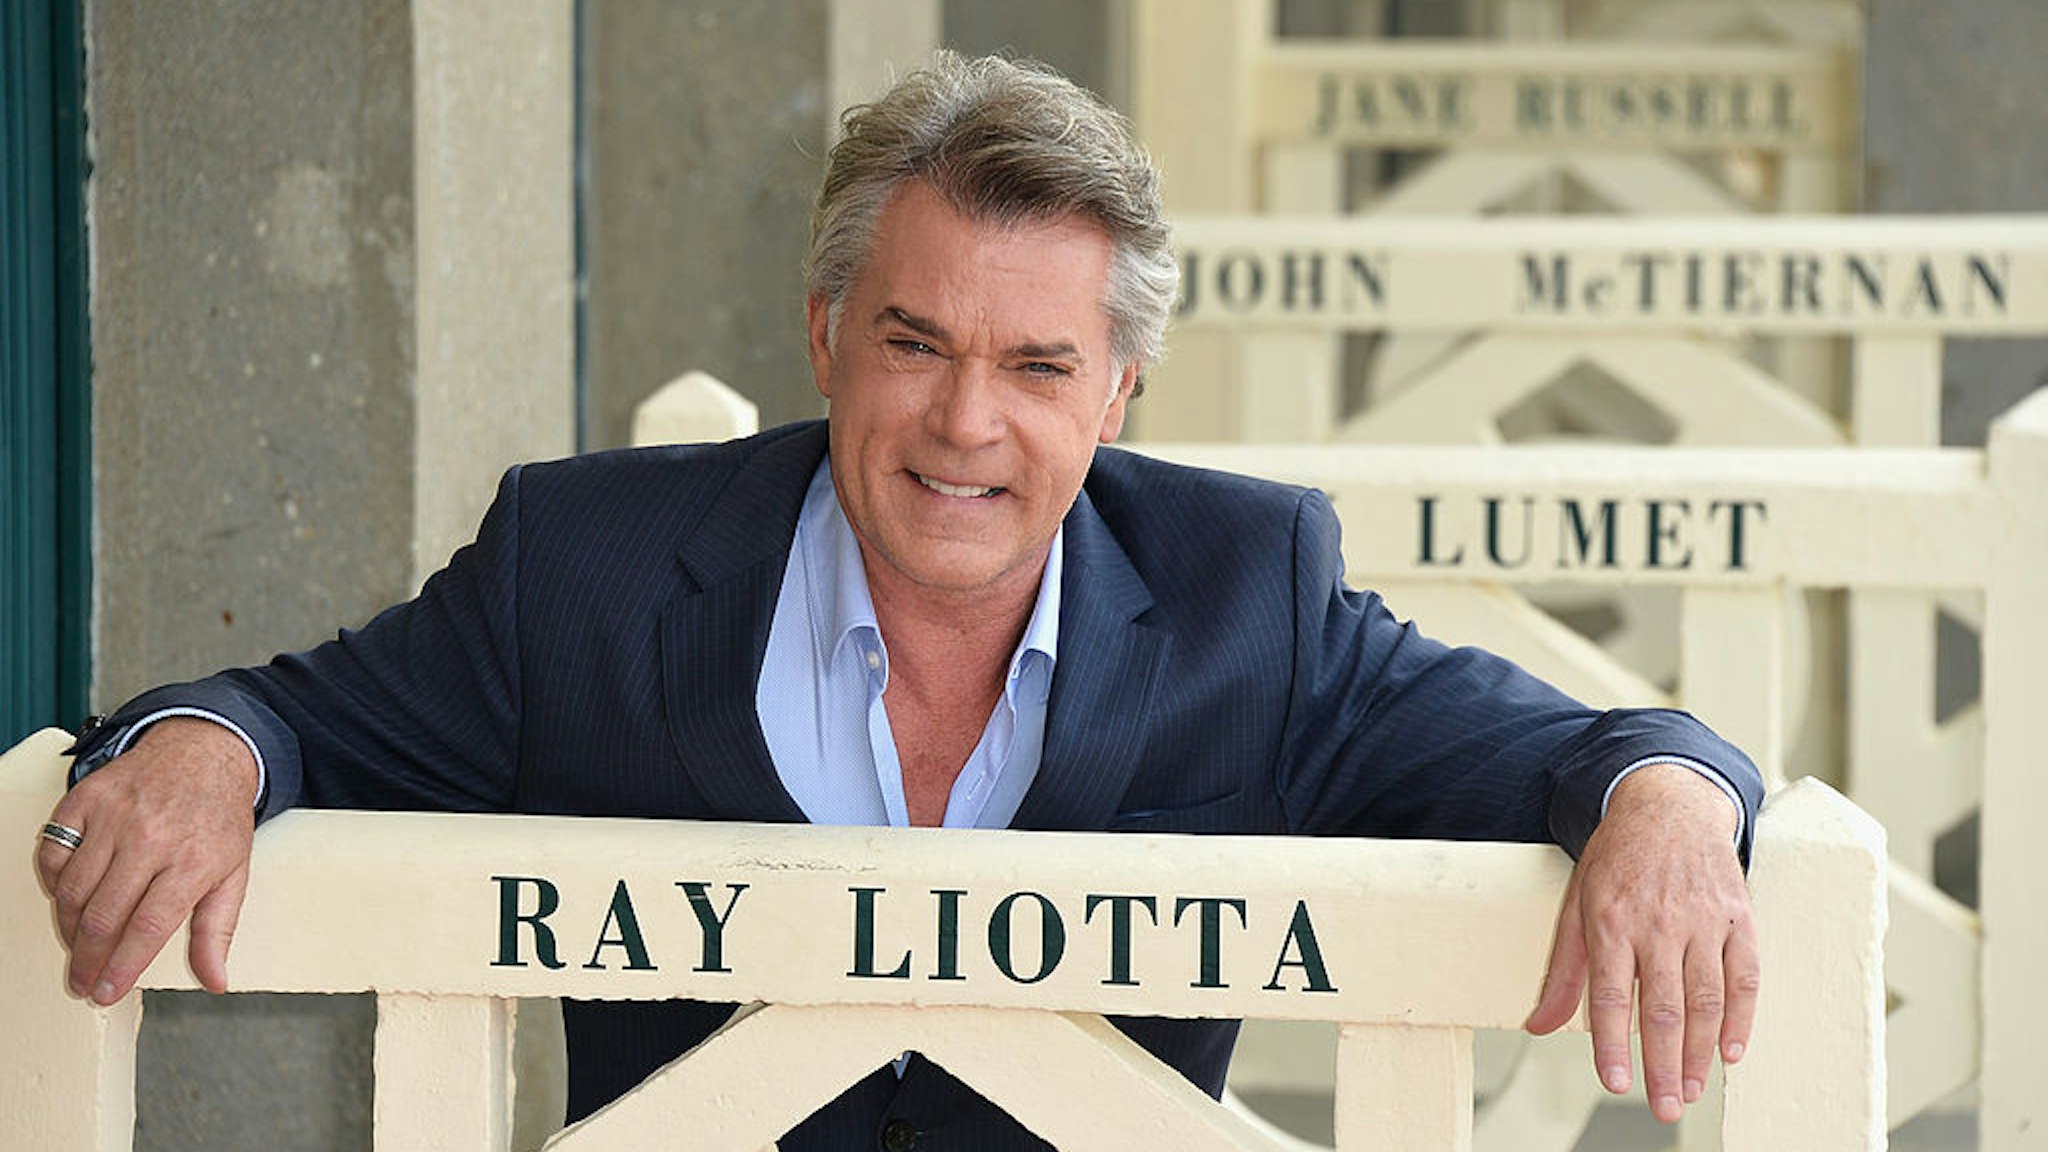 DEAUVILLE, FRANCE - SEPTEMBER 09: Actor Ray Liotta unveils his cabin sign as a tribute for his career along the Promenade des Planches during the 40th Deauville American Film Festival on September 9, 2014 in Deauville, France. (Photo by Pascal Le Segretain/Getty Images)